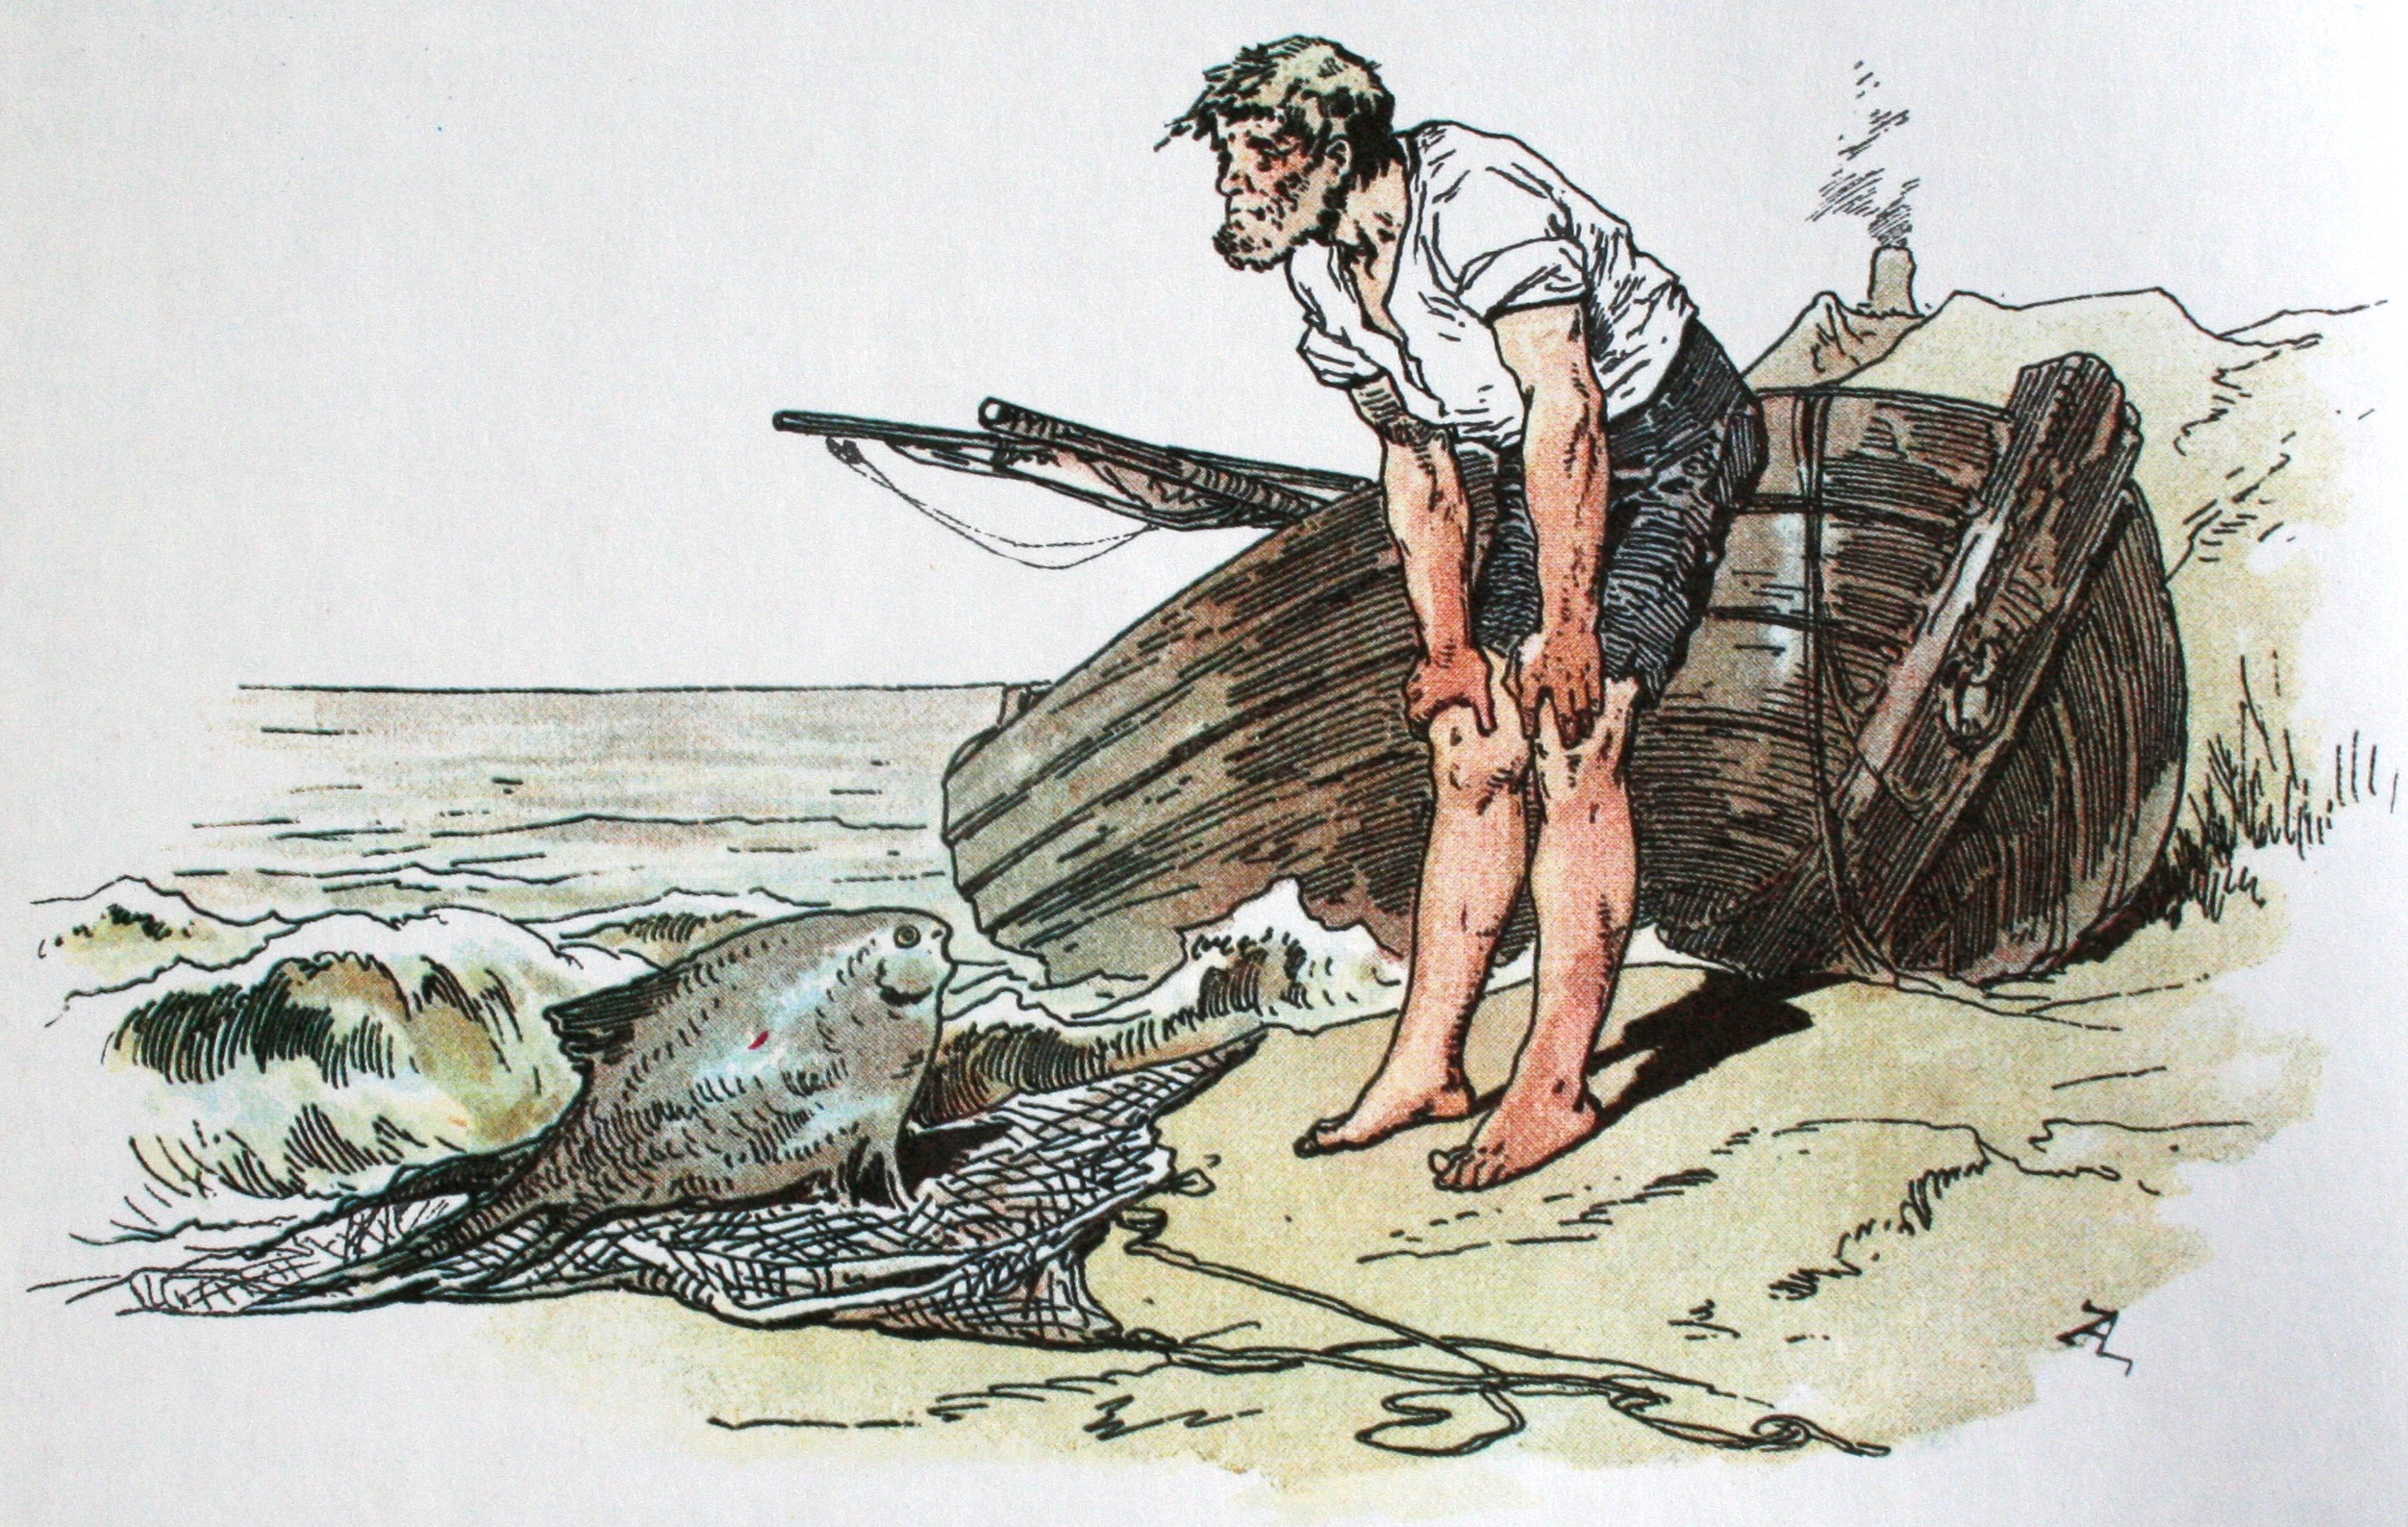 The Fisherman and His Wife illustration by Alexander Zick This work is in the public domain in the United States because it was published (or registered with the U.S. Copyright Office) before January 1, 1923.